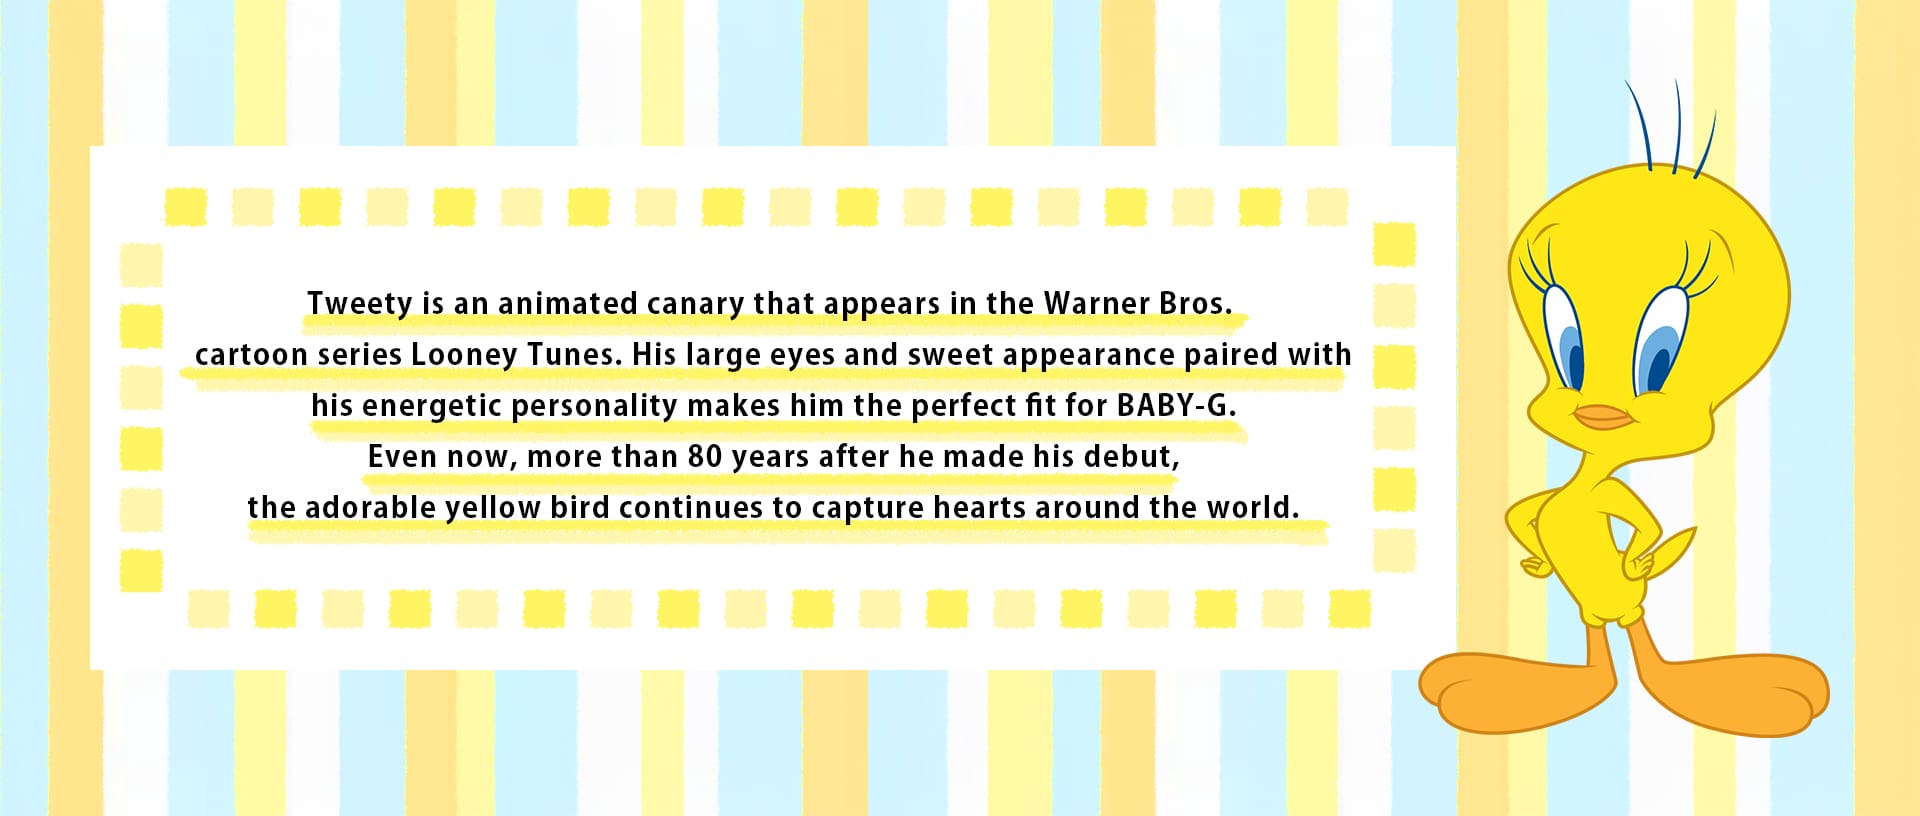 Graphic of Looney Tunes Tweety Bird and text reading Tweety is an animated canary that appears in the Warner Bros. cartoon series Looney Tunes. His large eyes and sweet appearance paired with his energetic personality make him the perfect fit for BABY-G. Even now, more than eighty years after he made his debut, the adorable yellow bird continues to capture hearts around the world.